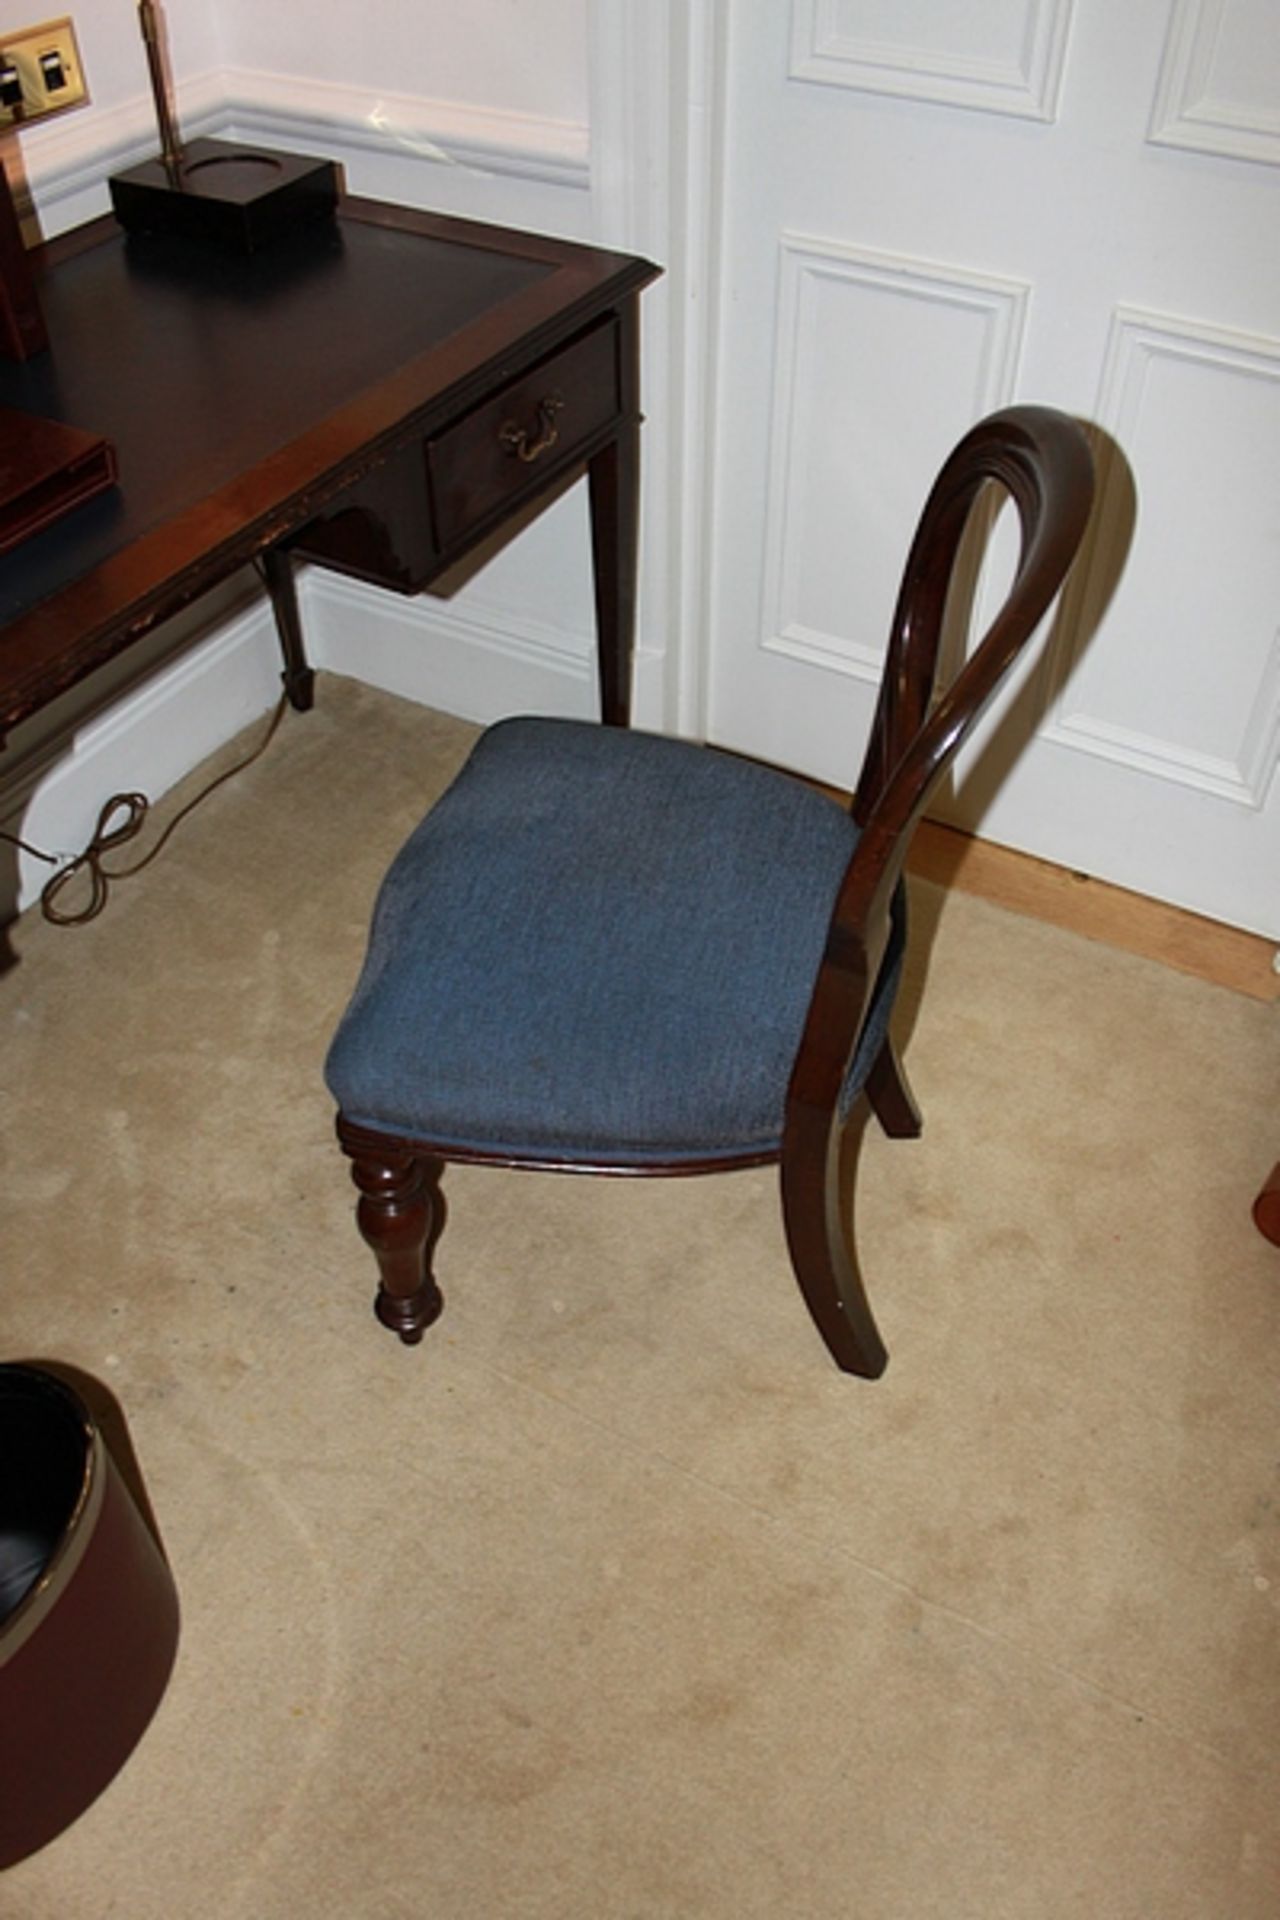 A mahogany Georgian style side chair with blue seat pad 400mm seat pitch